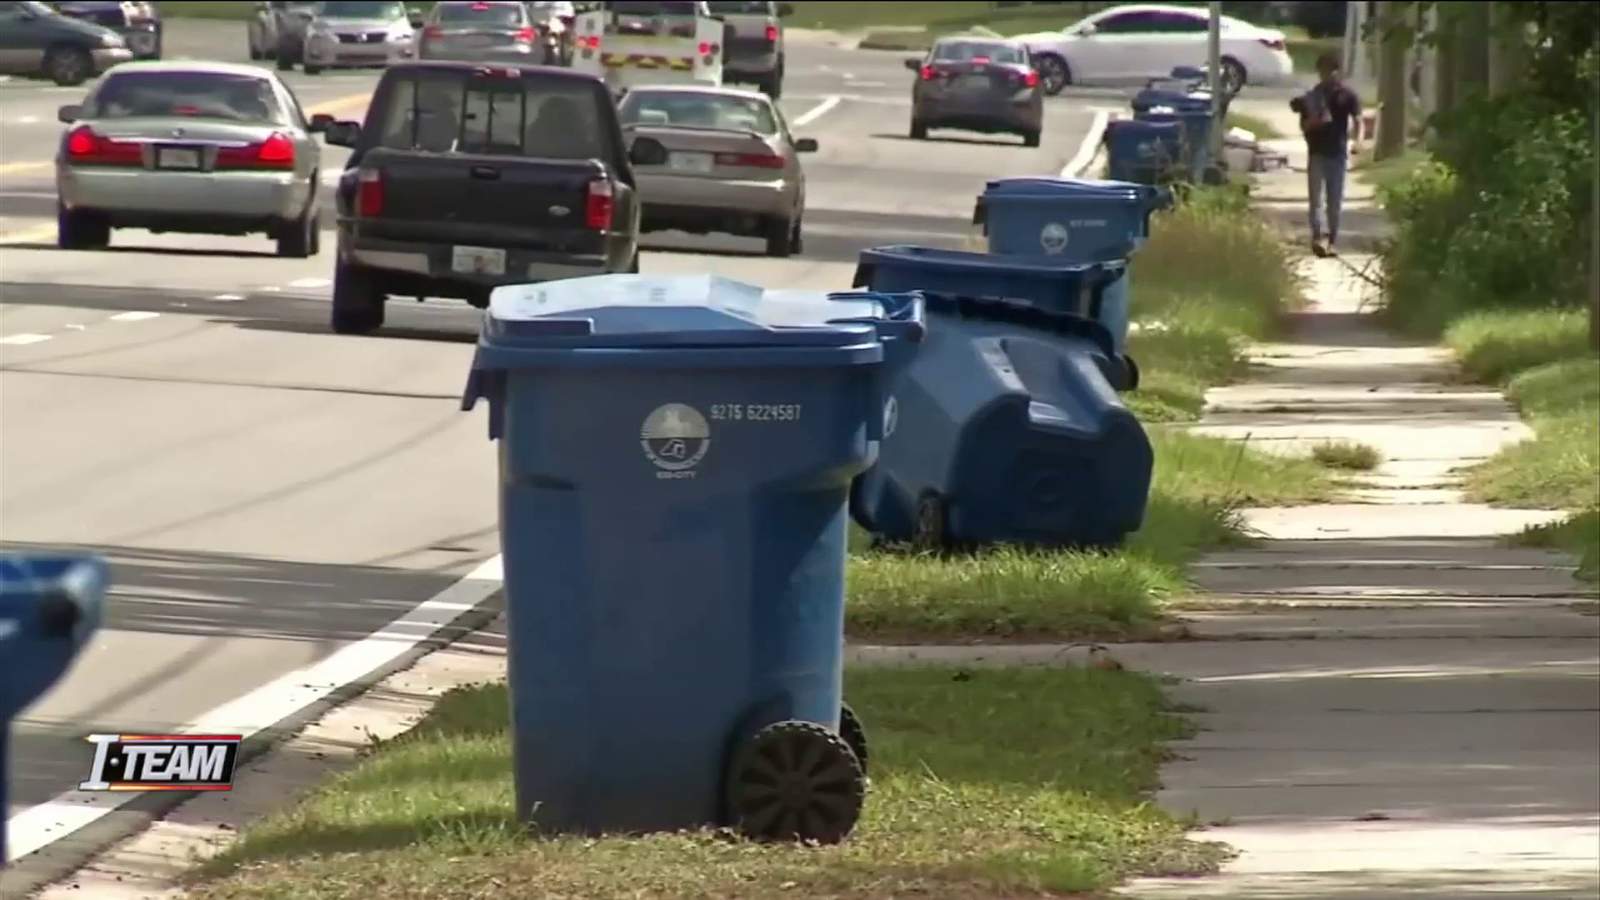 I-TEAM: City trash company gets a second chance after 7,000 missed trash collections, chemical spills